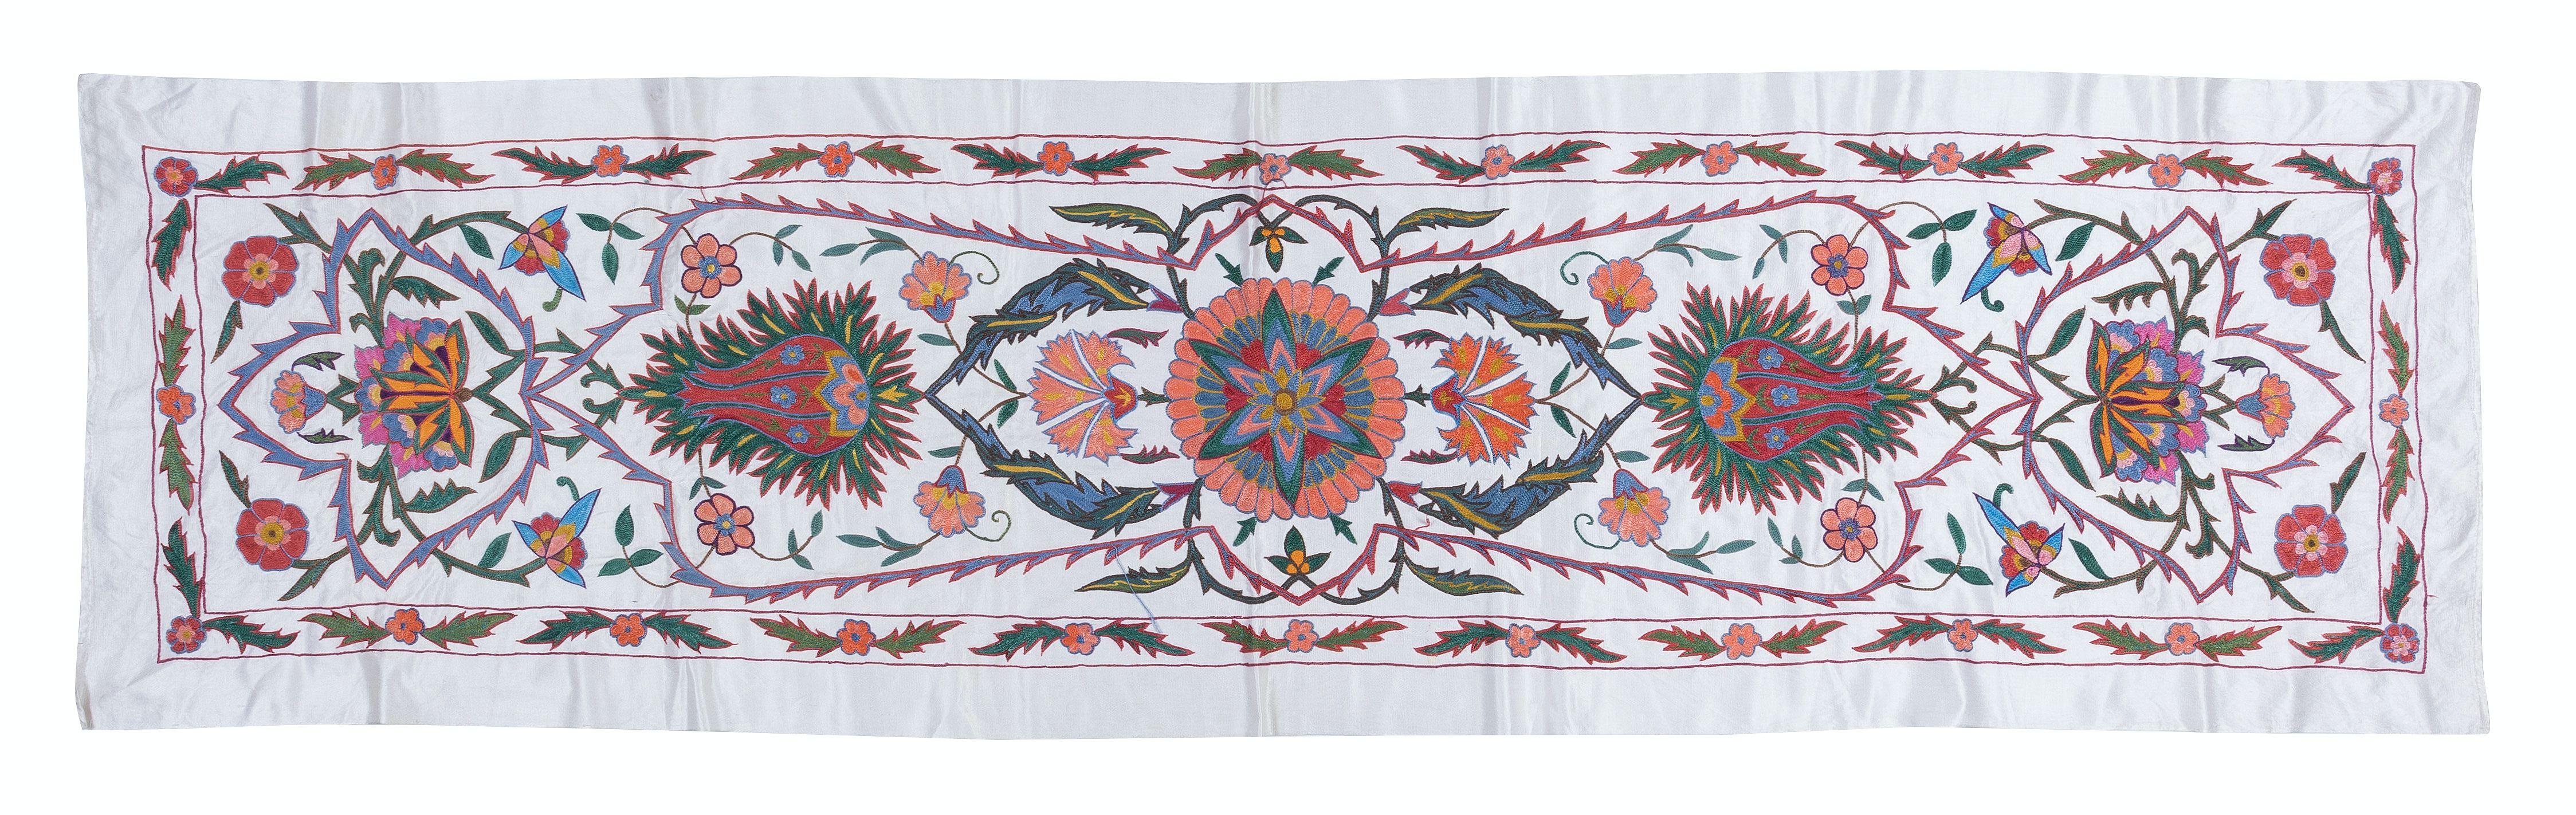 1.8x6.5 ft 100% Silk Table Runner, Hand Embroidered Wall Hanging, Uzbek Tapestry In New Condition For Sale In Philadelphia, PA